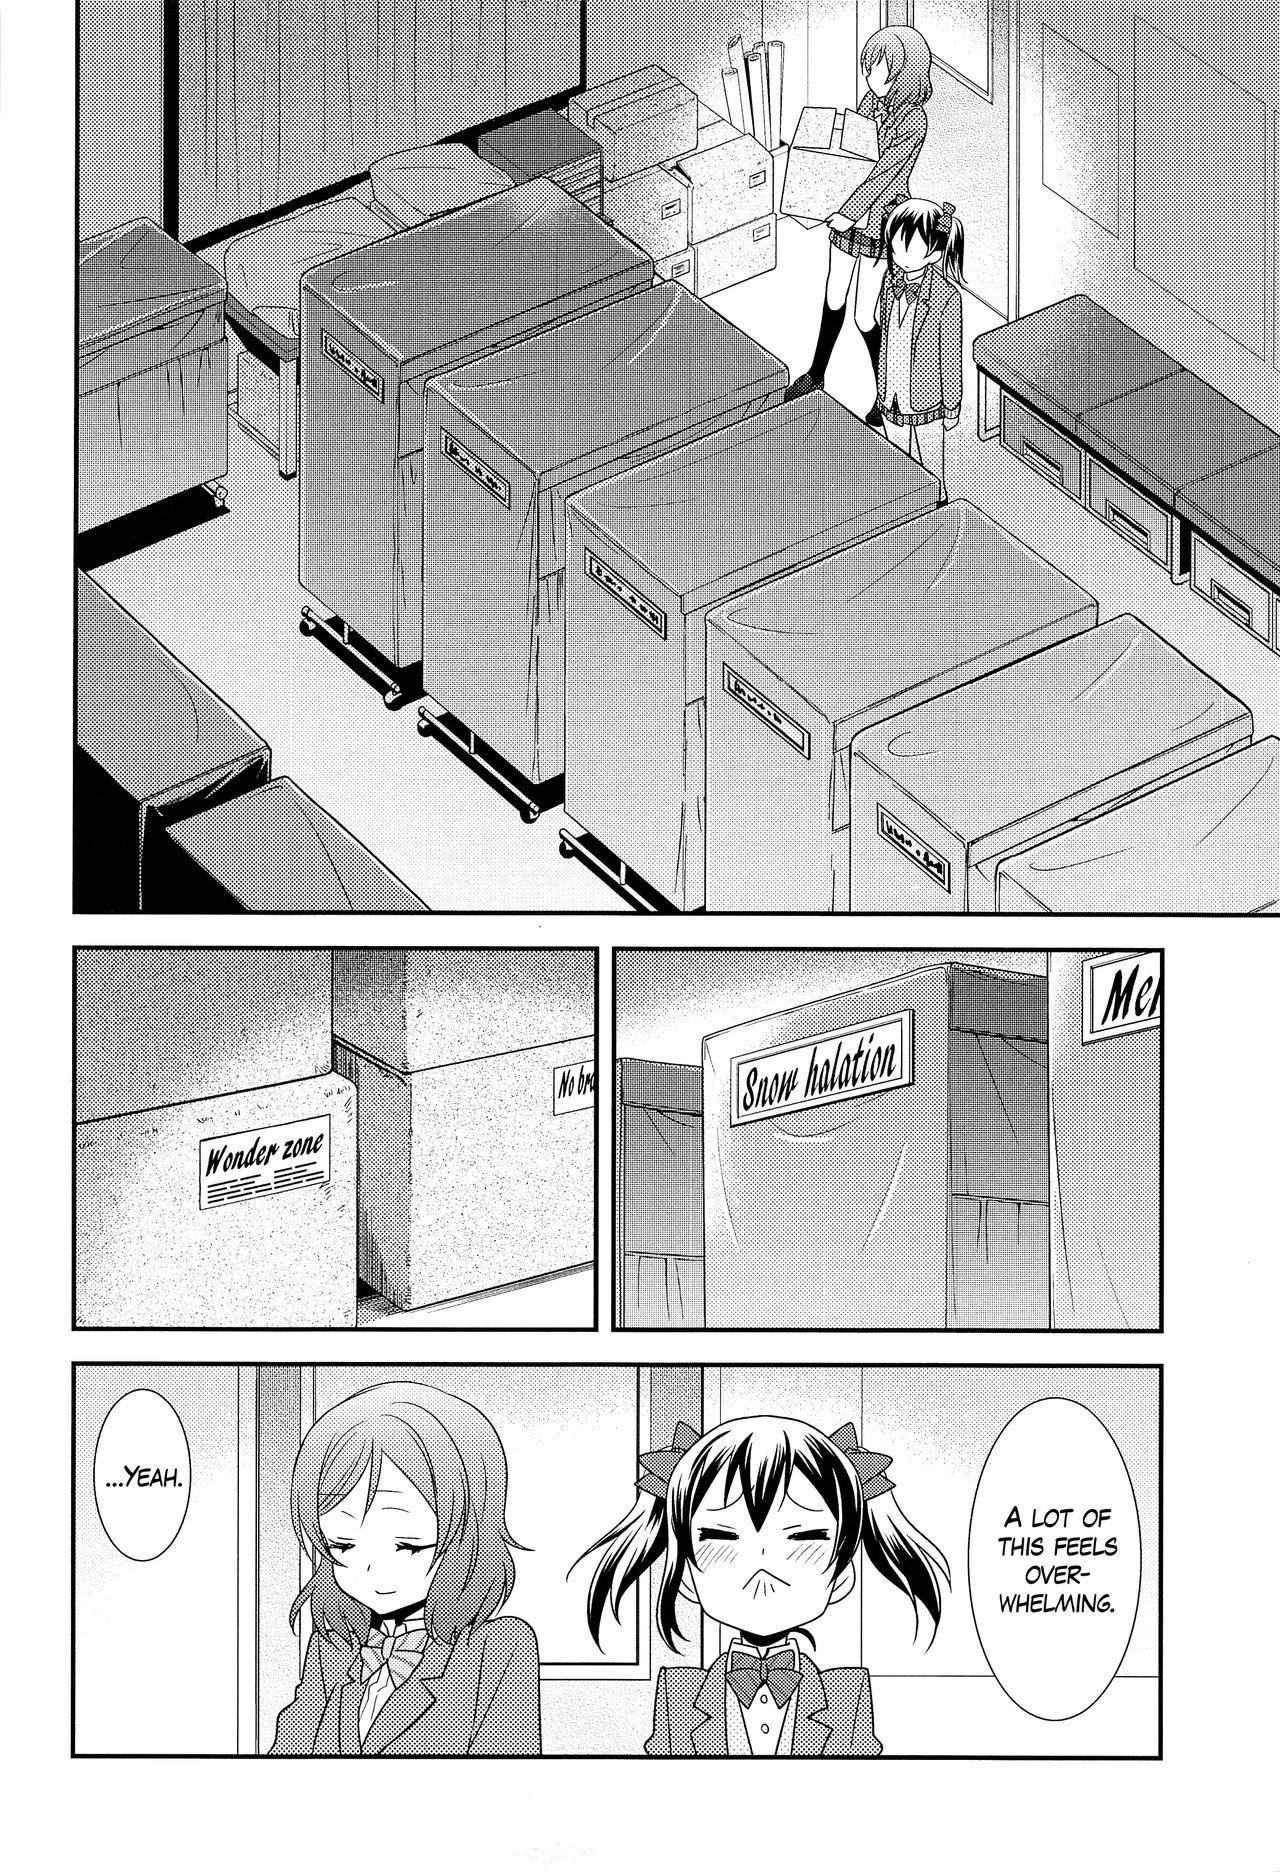 Cuck Bokura no Te ni wa Ai Shika nai. | There’s Nothing but Love In Our Hands. - Love live Ass Fucked - Page 10